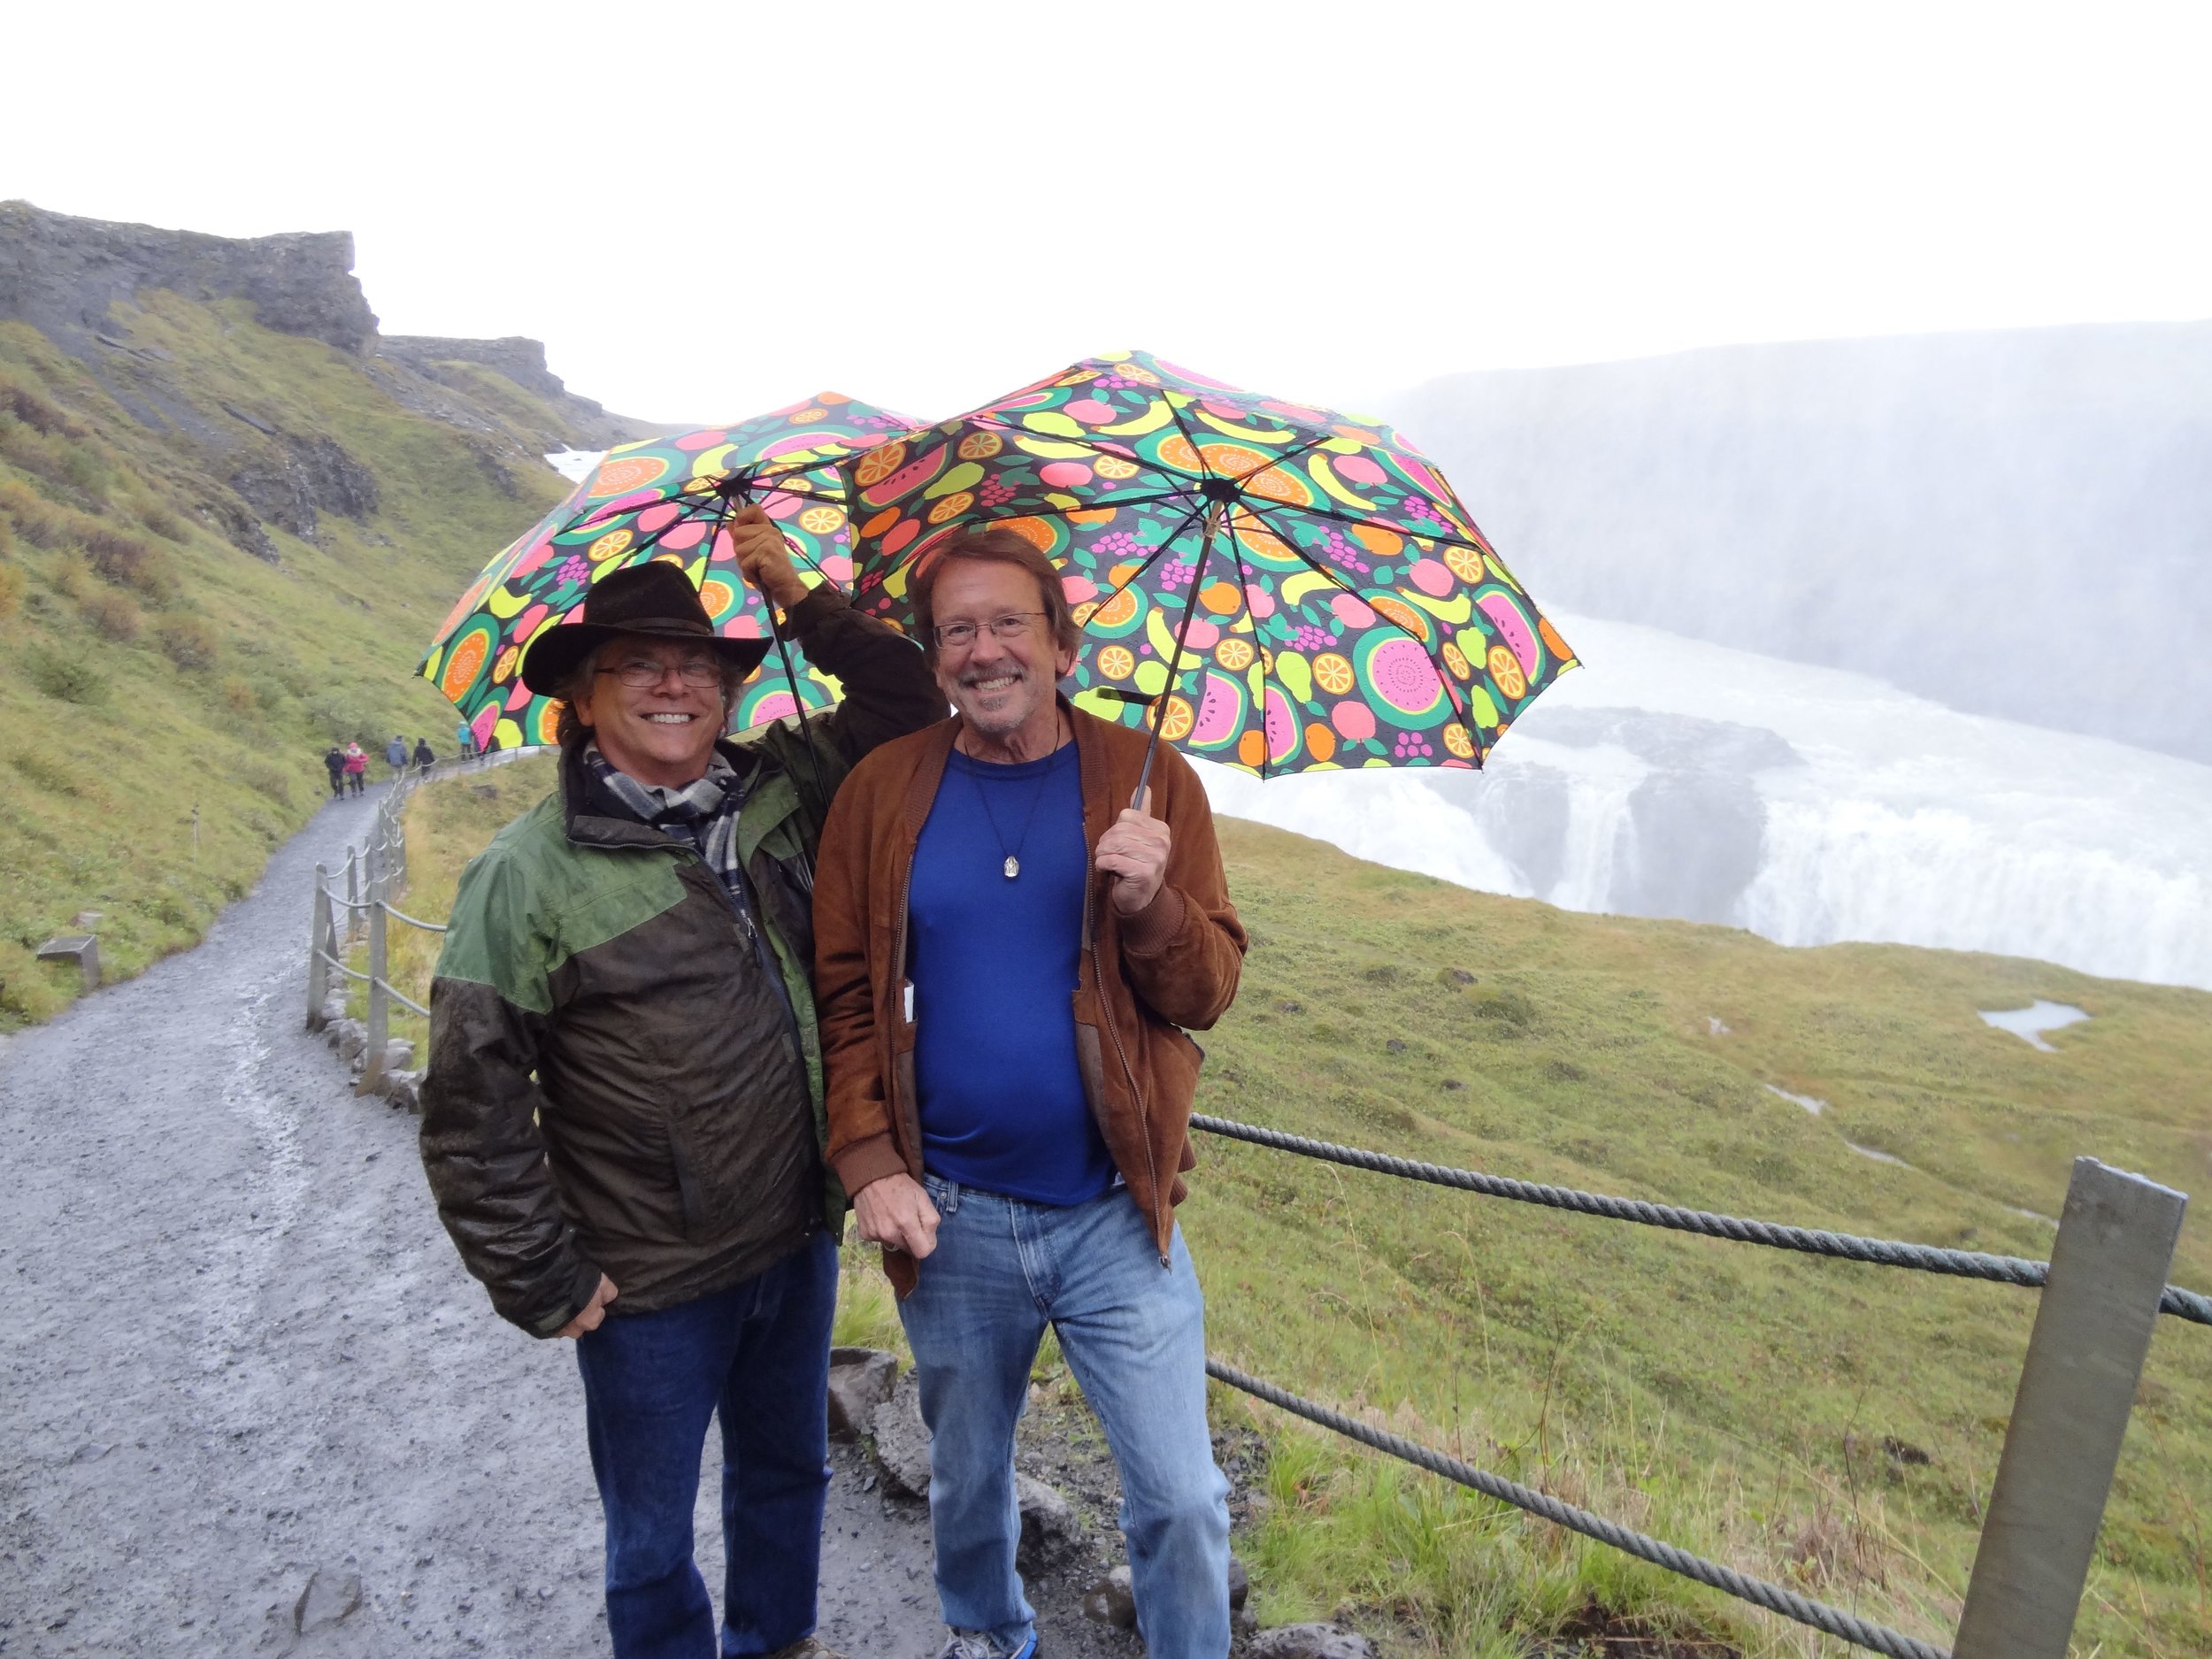 With Stephen Silha at Gulfoss (Golden Falls), an enormous waterfall located in the canyon of the Hvítá river in southwest Iceland.